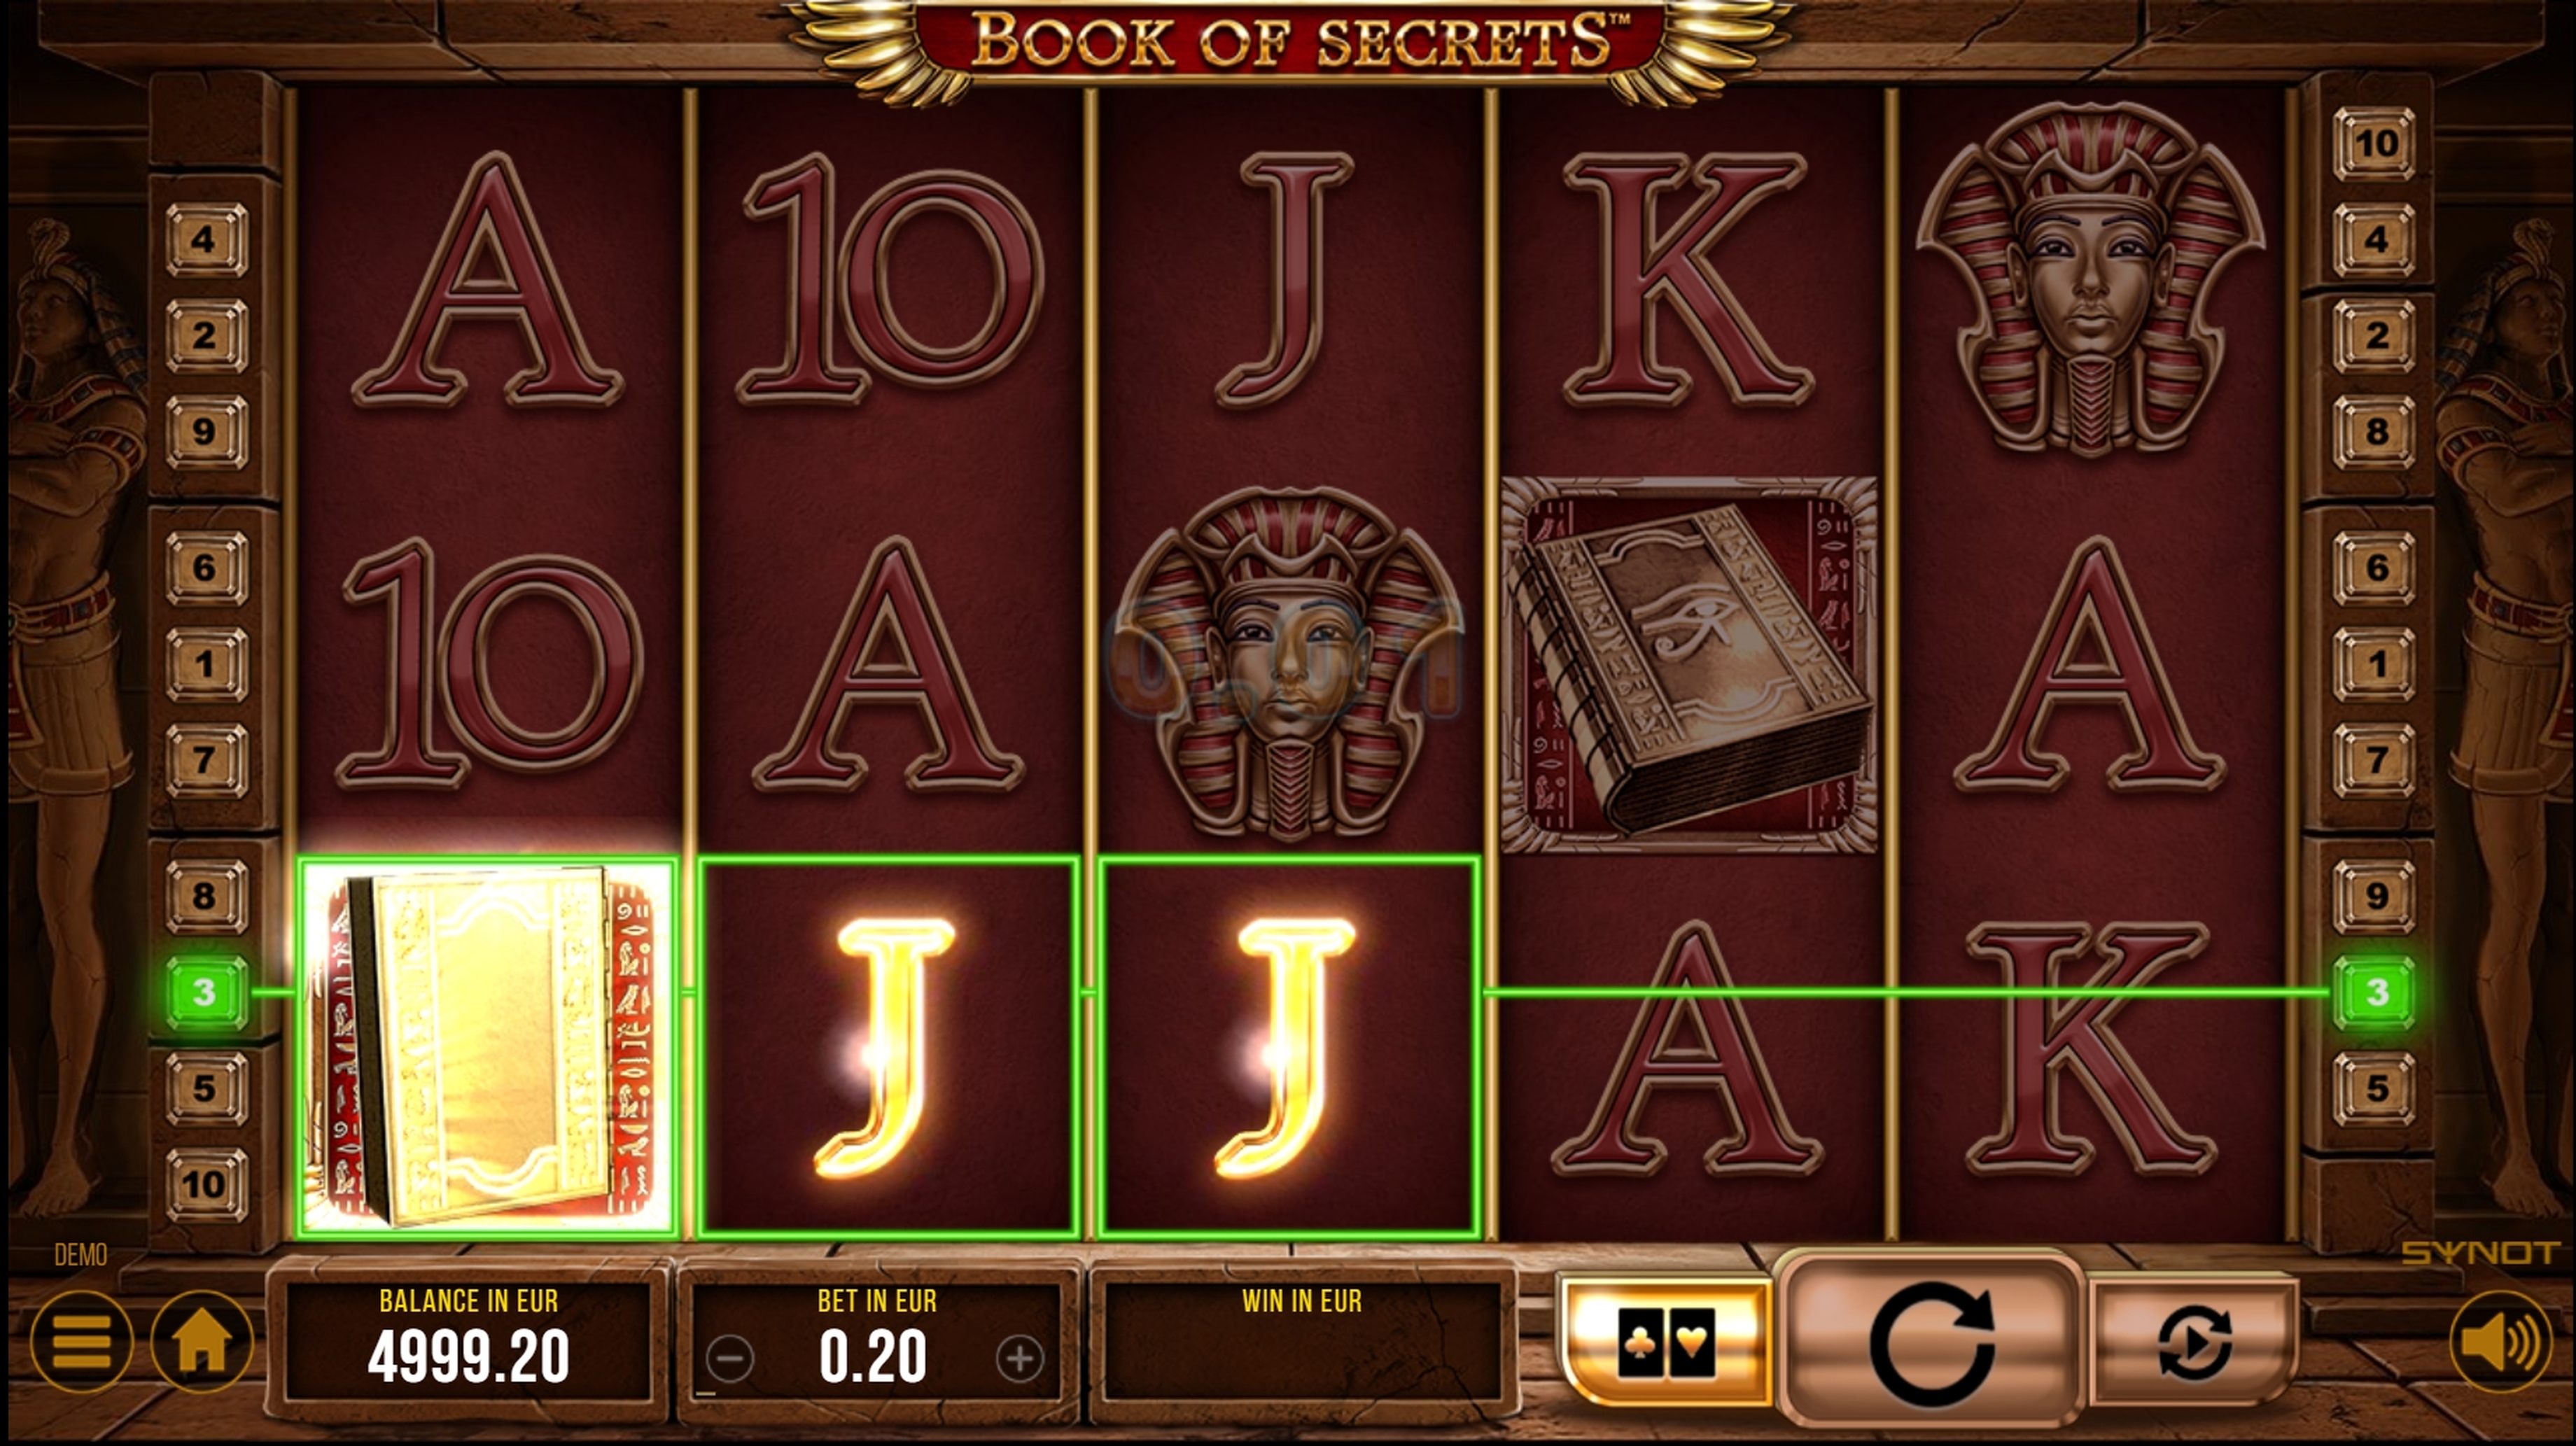 Win Money in Book of Secrets Free Slot Game by Synot Games